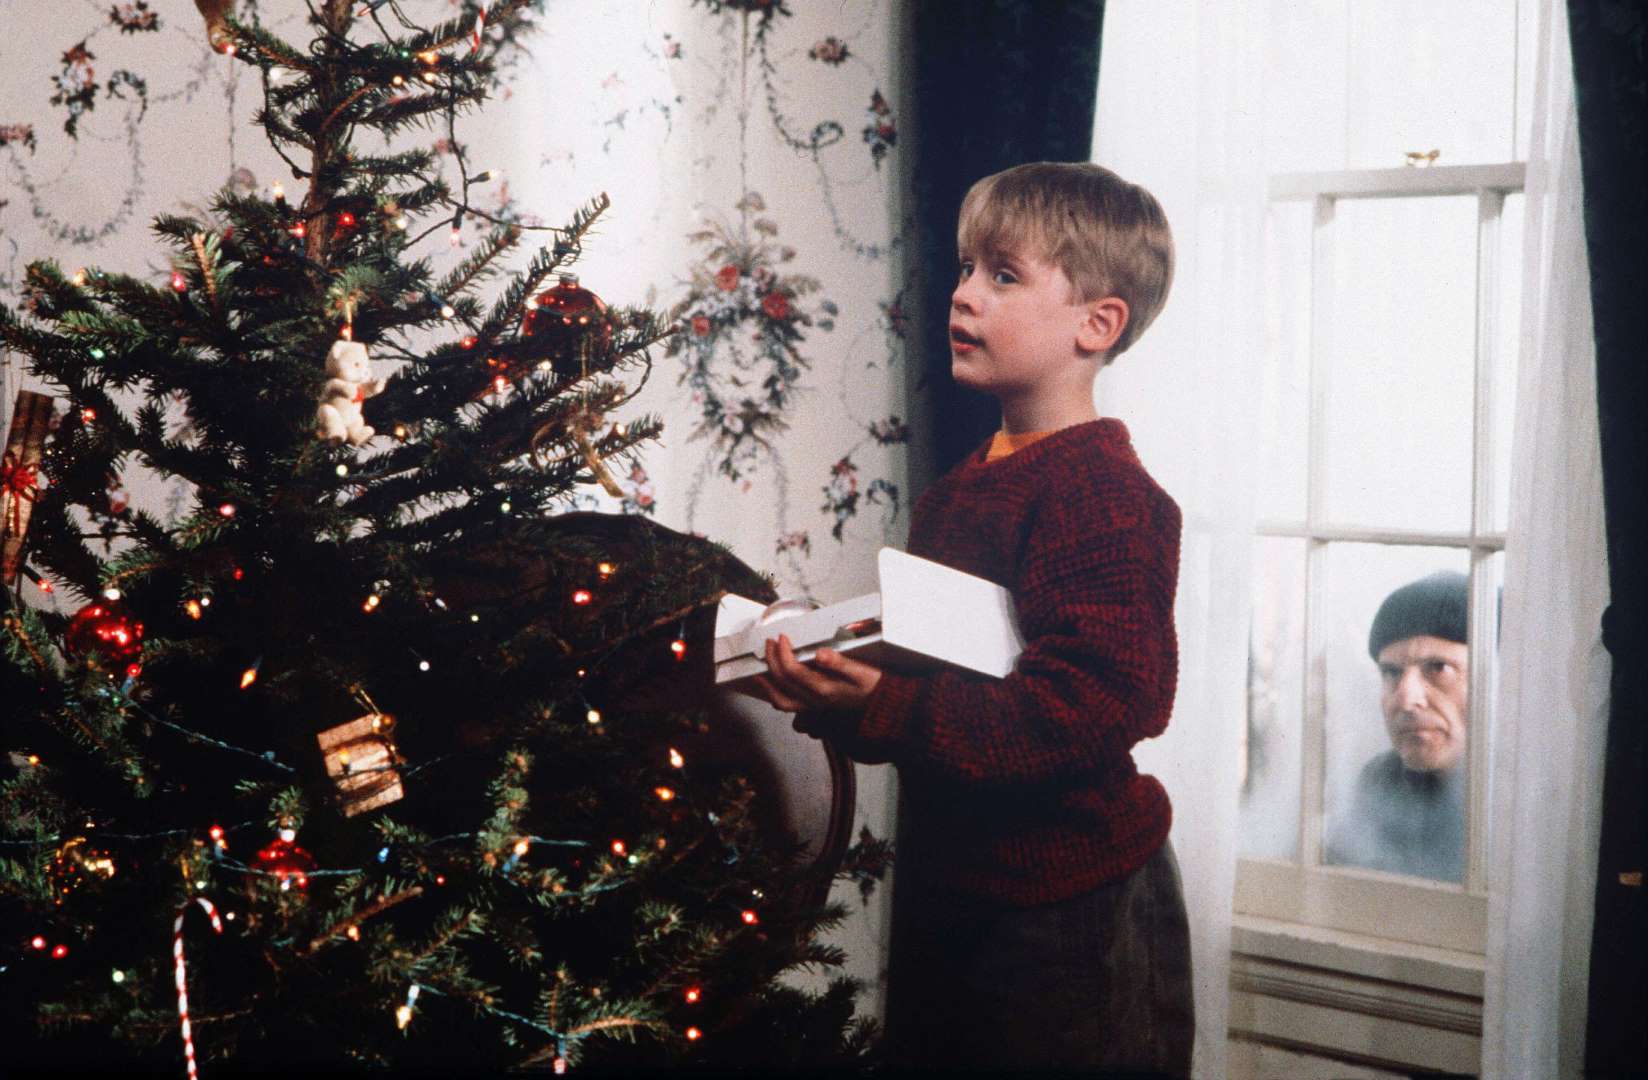 Home Alone – a burglar peers through the window of the McAllister house